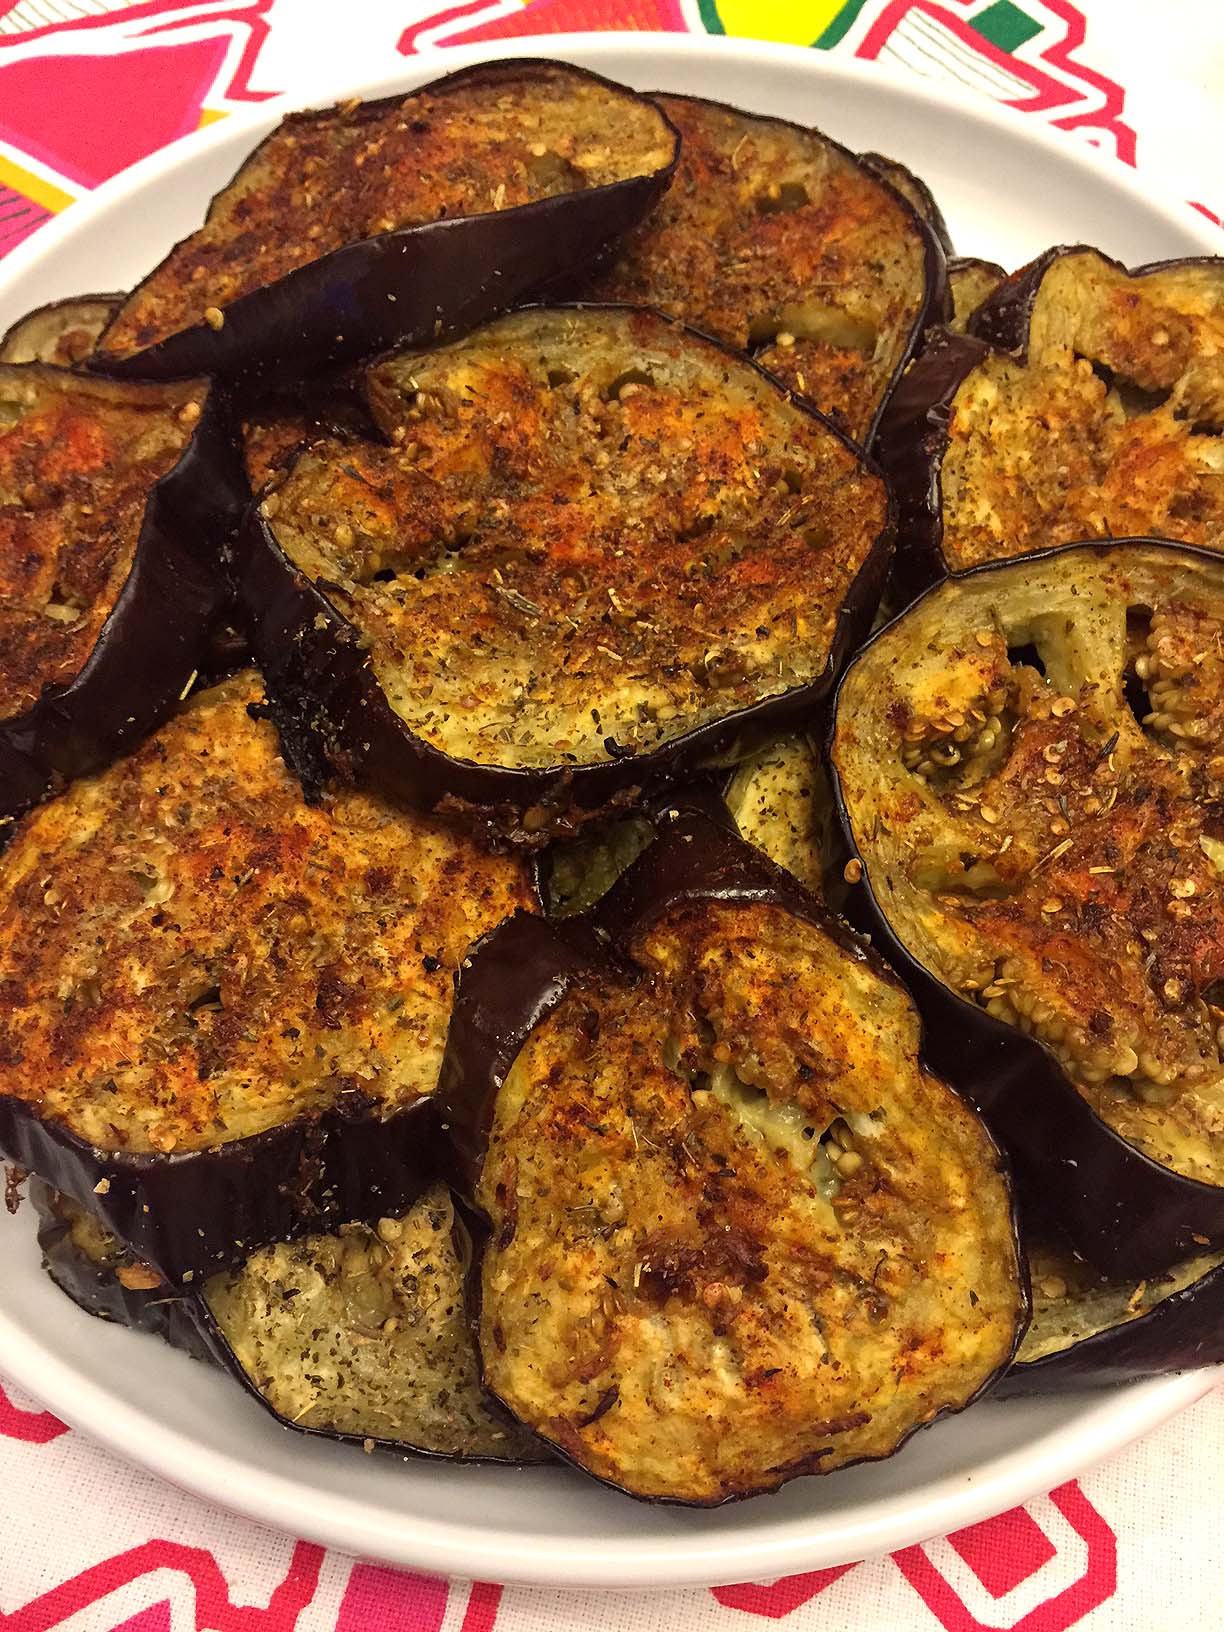 Simple Eggplant Recipes Awesome Spicy Garlic Oven Roasted Eggplant Slices Recipe – Melanie